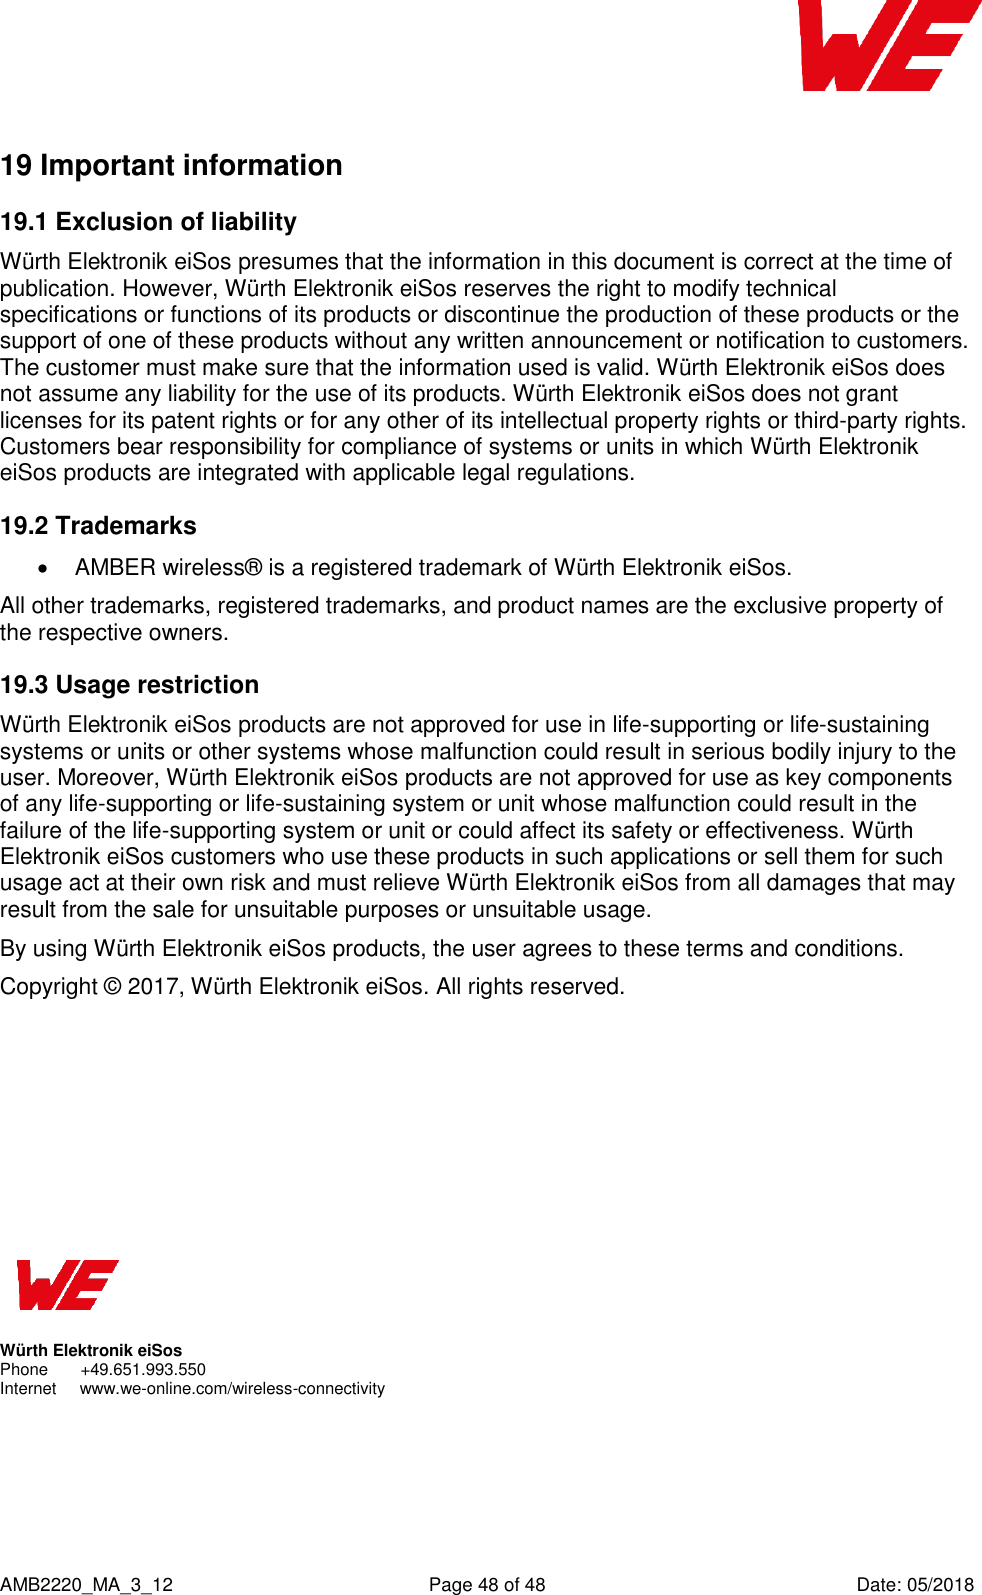    AMB2220_MA_3_12  Page 48 of 48  Date: 05/2018 19 Important information  19.1 Exclusion of liability Würth Elektronik eiSos presumes that the information in this document is correct at the time of publication. However, Würth Elektronik eiSos reserves the right to modify technical specifications or functions of its products or discontinue the production of these products or the support of one of these products without any written announcement or notification to customers. The customer must make sure that the information used is valid. Würth Elektronik eiSos does not assume any liability for the use of its products. Würth Elektronik eiSos does not grant licenses for its patent rights or for any other of its intellectual property rights or third-party rights. Customers bear responsibility for compliance of systems or units in which Würth Elektronik eiSos products are integrated with applicable legal regulations. 19.2 Trademarks   AMBER wireless® is a registered trademark of Würth Elektronik eiSos. All other trademarks, registered trademarks, and product names are the exclusive property of the respective owners. 19.3 Usage restriction Würth Elektronik eiSos products are not approved for use in life-supporting or life-sustaining systems or units or other systems whose malfunction could result in serious bodily injury to the user. Moreover, Würth Elektronik eiSos products are not approved for use as key components of any life-supporting or life-sustaining system or unit whose malfunction could result in the failure of the life-supporting system or unit or could affect its safety or effectiveness. Würth Elektronik eiSos customers who use these products in such applications or sell them for such usage act at their own risk and must relieve Würth Elektronik eiSos from all damages that may result from the sale for unsuitable purposes or unsuitable usage. By using Würth Elektronik eiSos products, the user agrees to these terms and conditions. Copyright © 2017, Würth Elektronik eiSos. All rights reserved.             Würth Elektronik eiSos Phone       +49.651.993.550  Internet     www.we-online.com/wireless-connectivity   